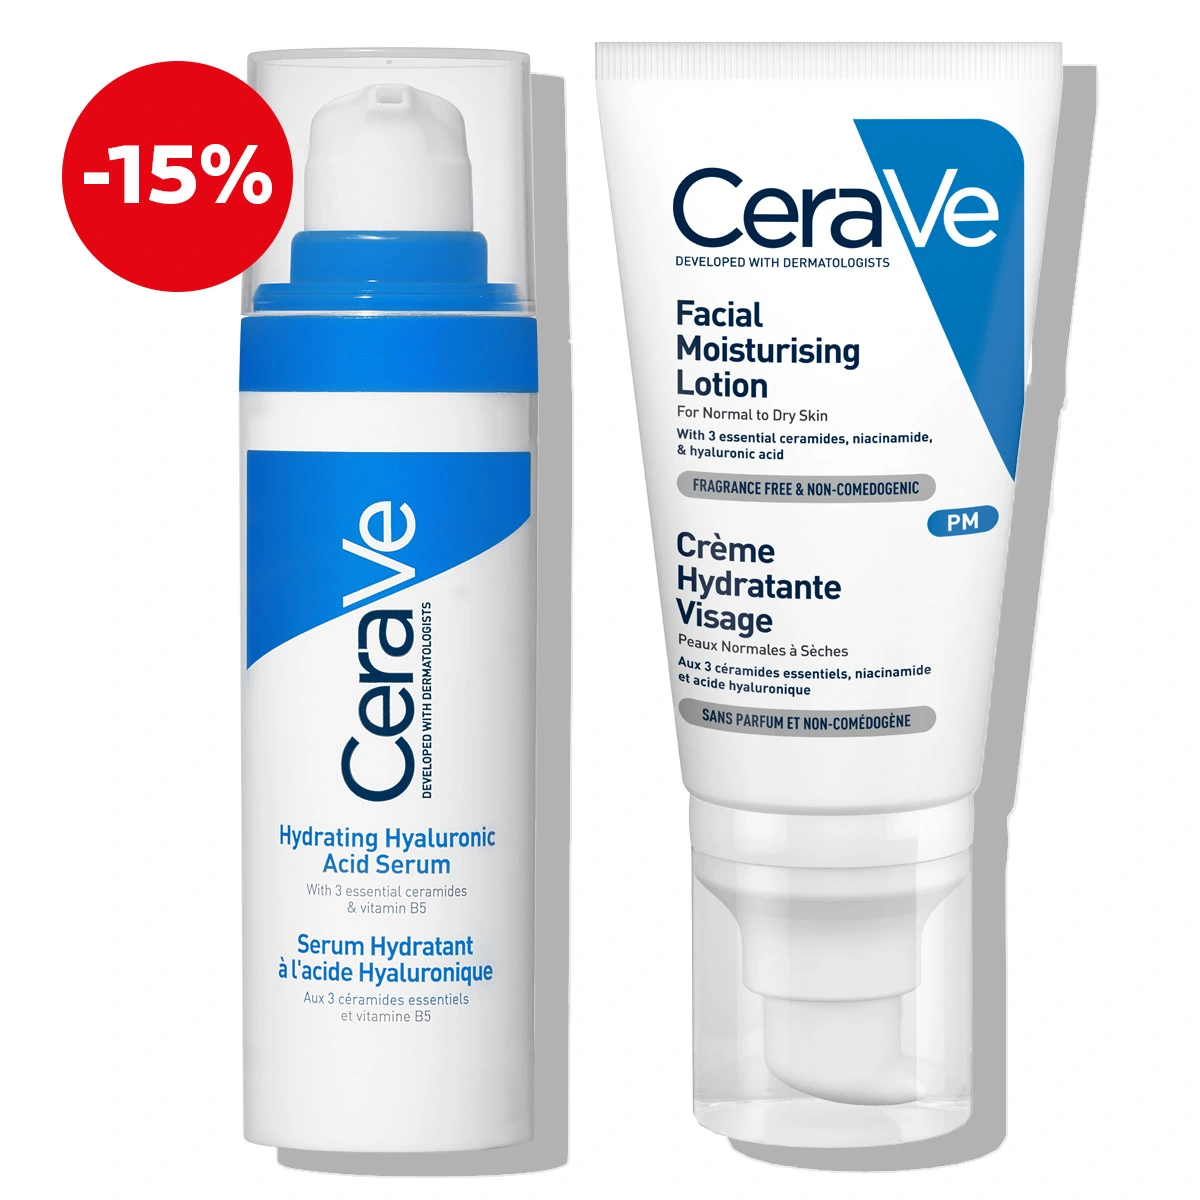 CeraVe-Hydrating-Face-Care-Protocol-with-hyaluronic-acid-_2_